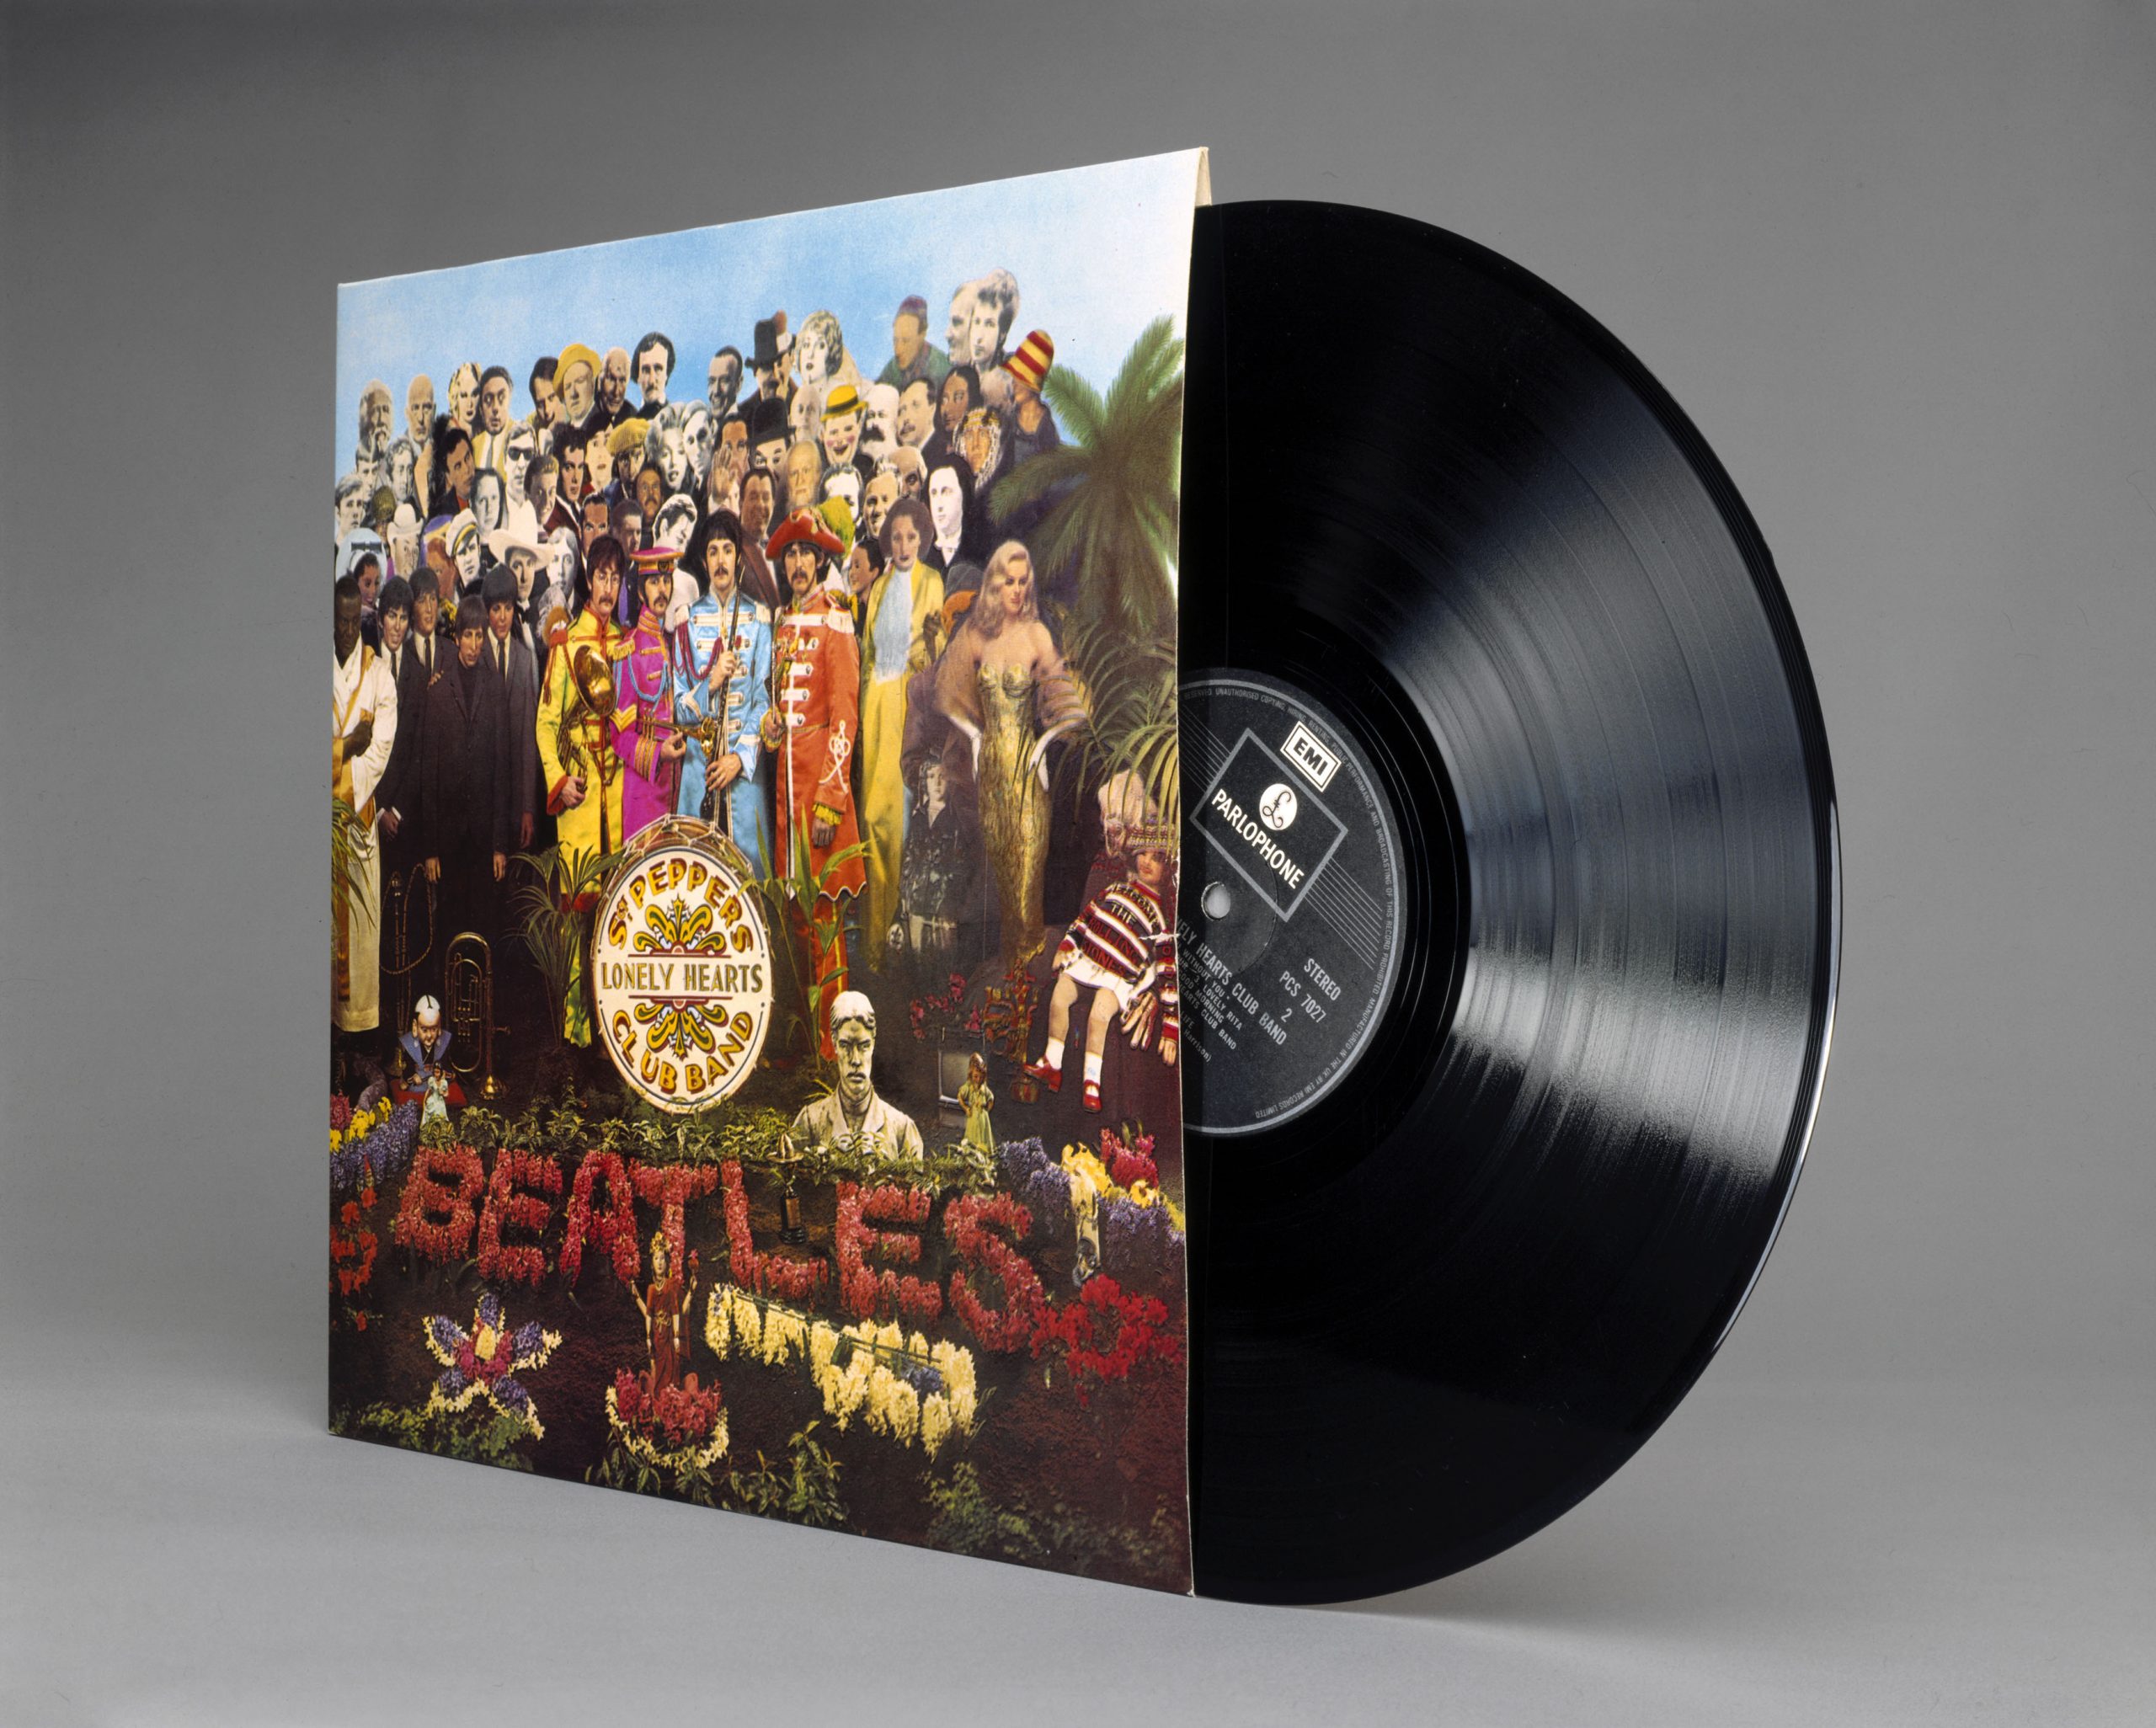 The Beatles' Sgt. Pepper's Lonely Hearts Club Band